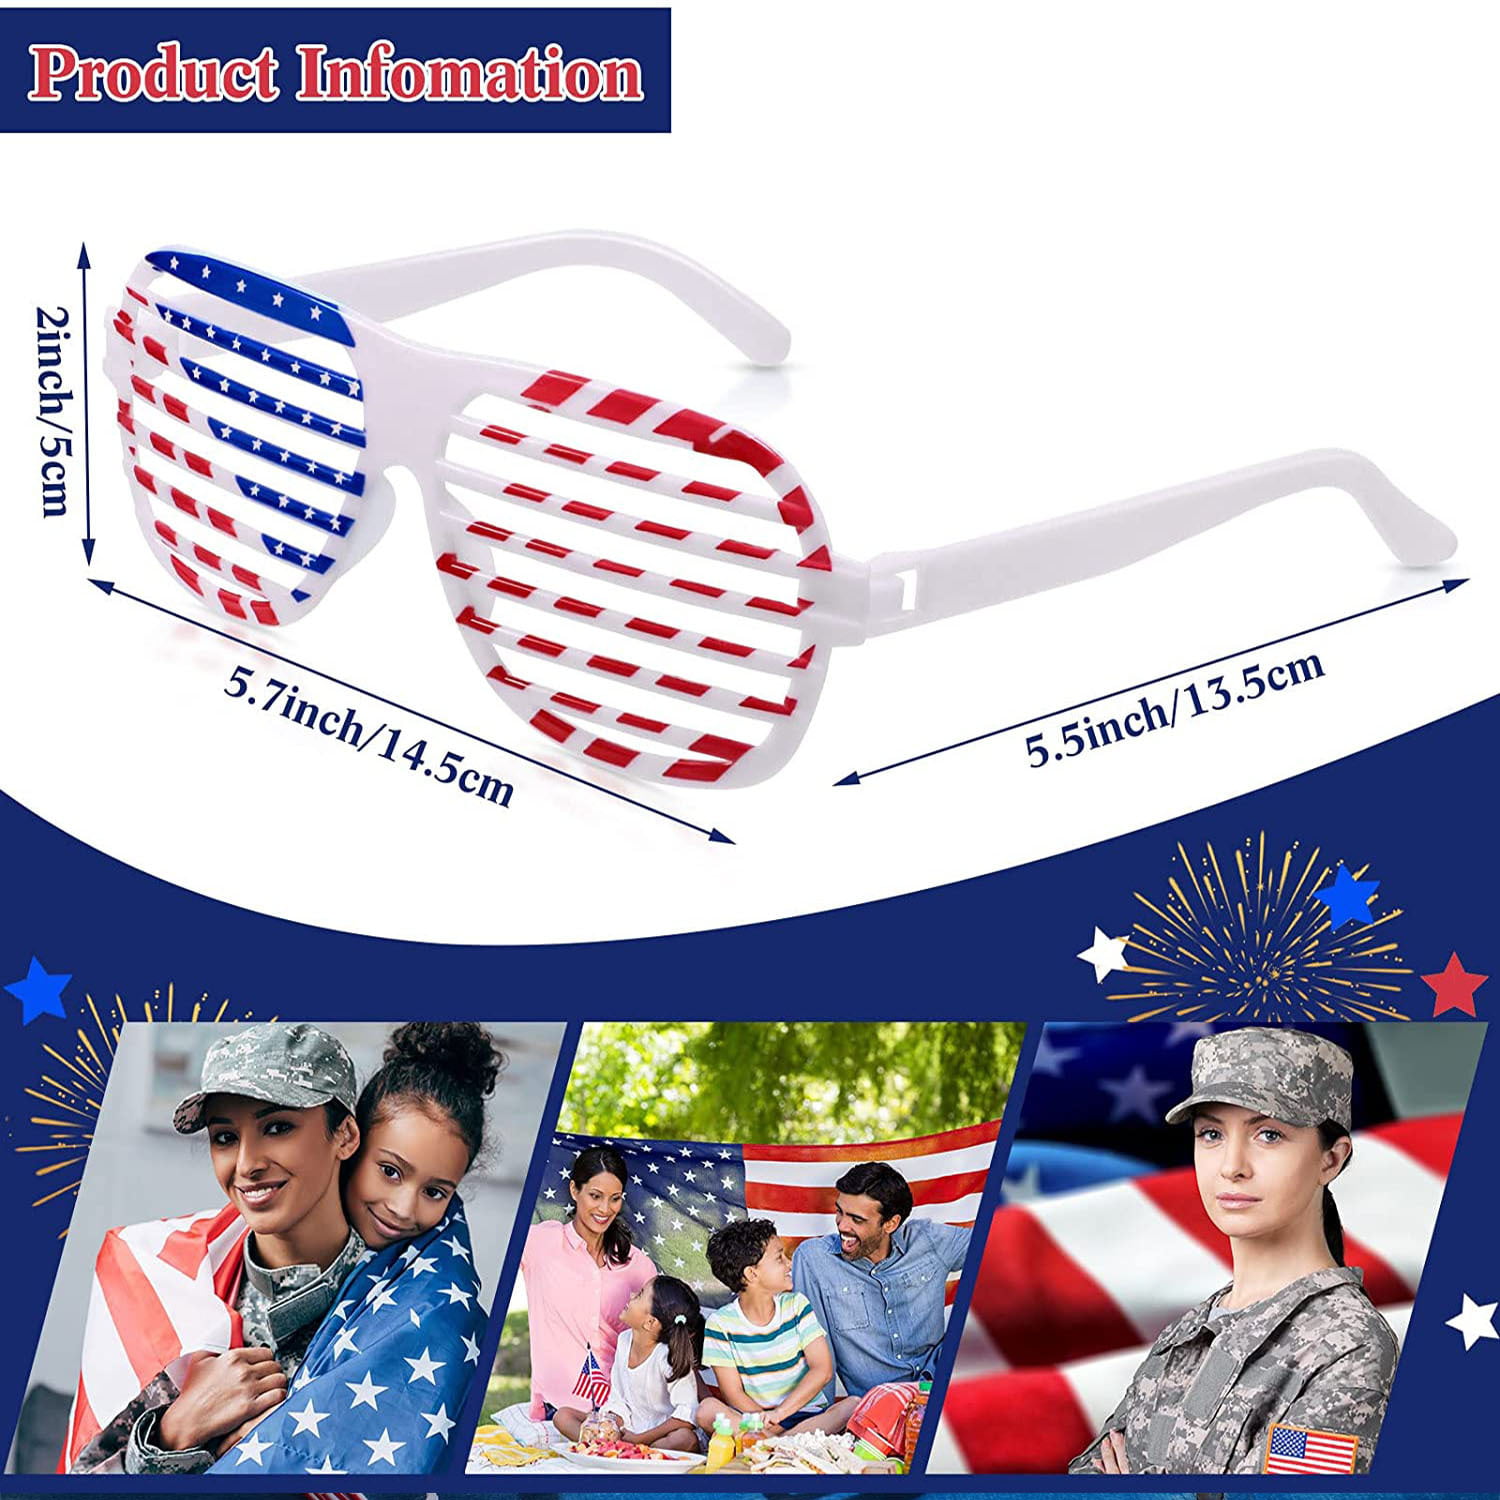 American Flag USA Patriotic Design Plastic Shutter Glasses Shades Sunglasses Eyewear for Party Props Decoration 12 Pairs 